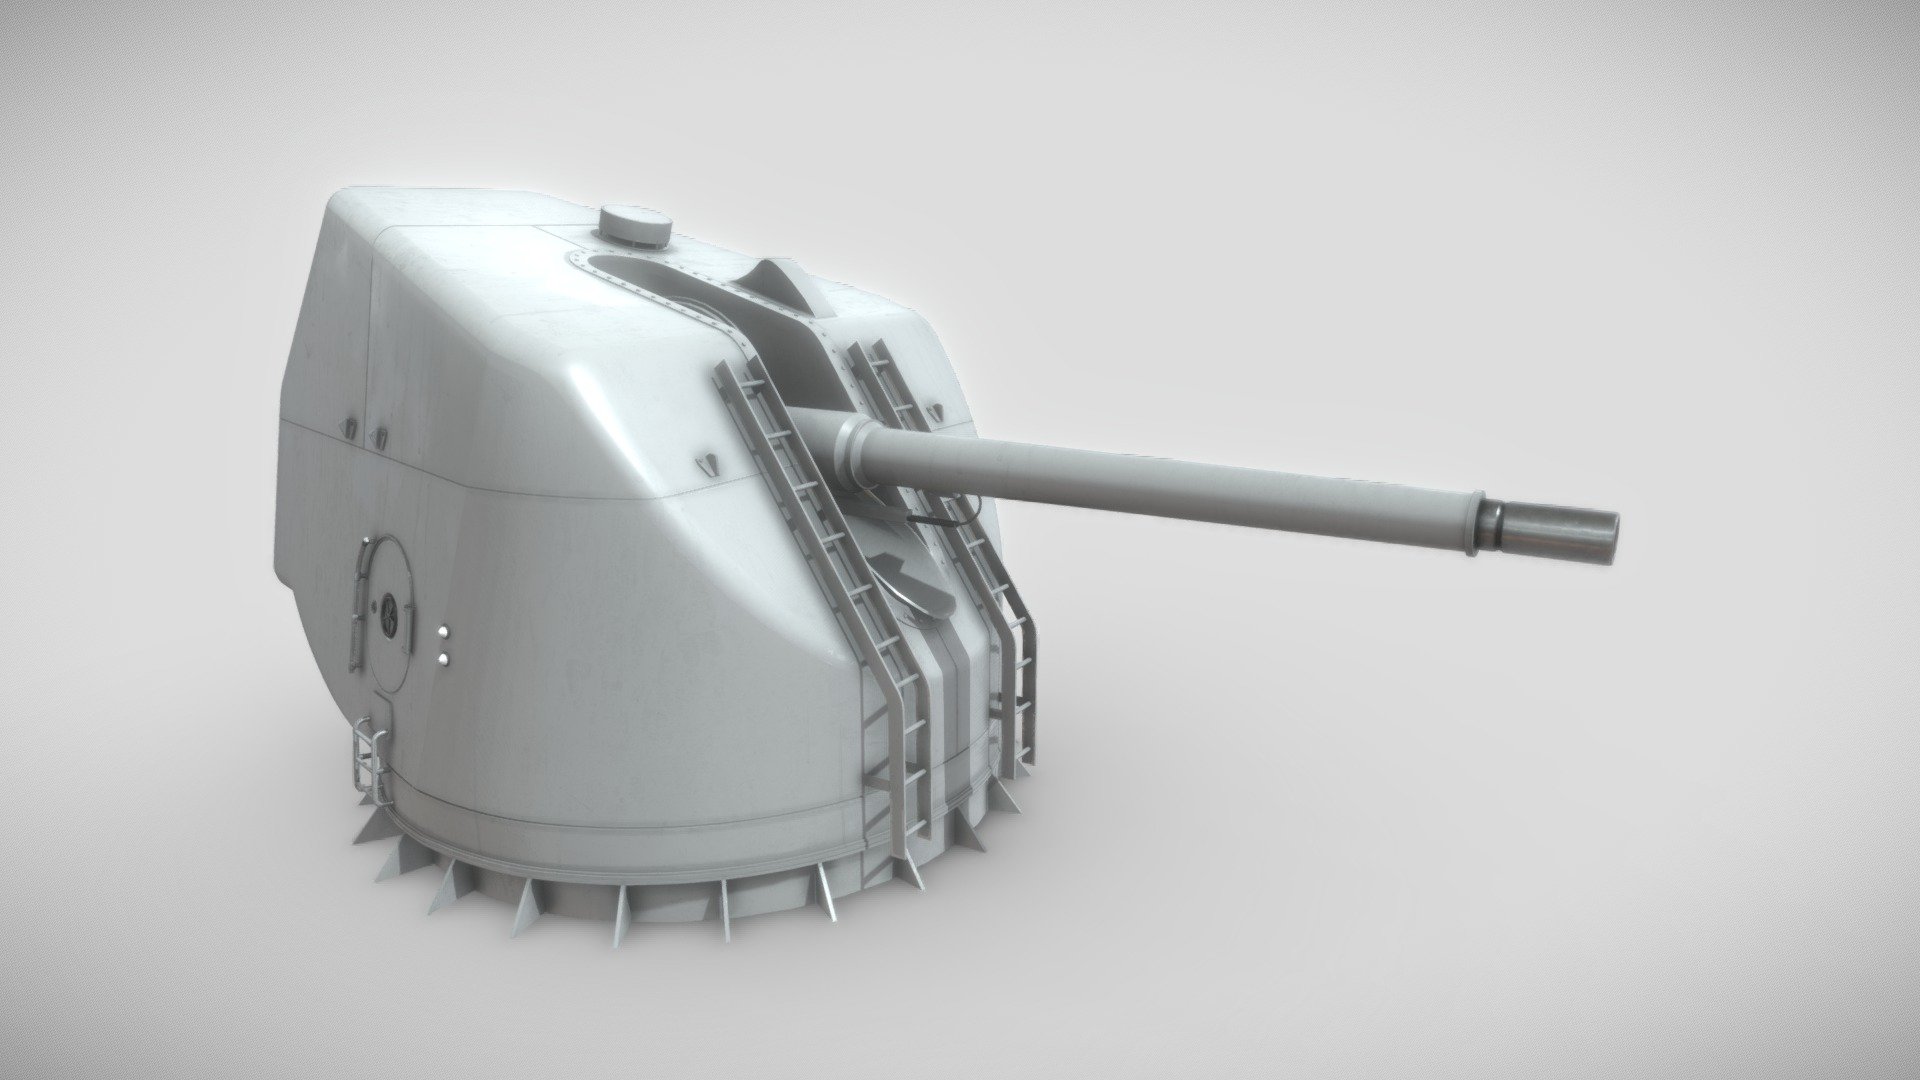 The Otobreda 127mm/54 Compact (127/54C) gun is a dual purpose naval artillery piece.

This 3D model was created using 3ds Max, with textures designed in Substance Painter. The model has been meticulously unwrapped and divided into separate parts, enabling the base and turret to rotate seamlessly. If necessary, I am also capable of exporting the textures in various formats suitable for Unity, Unreal Engine, or V-Ray integration 3d model